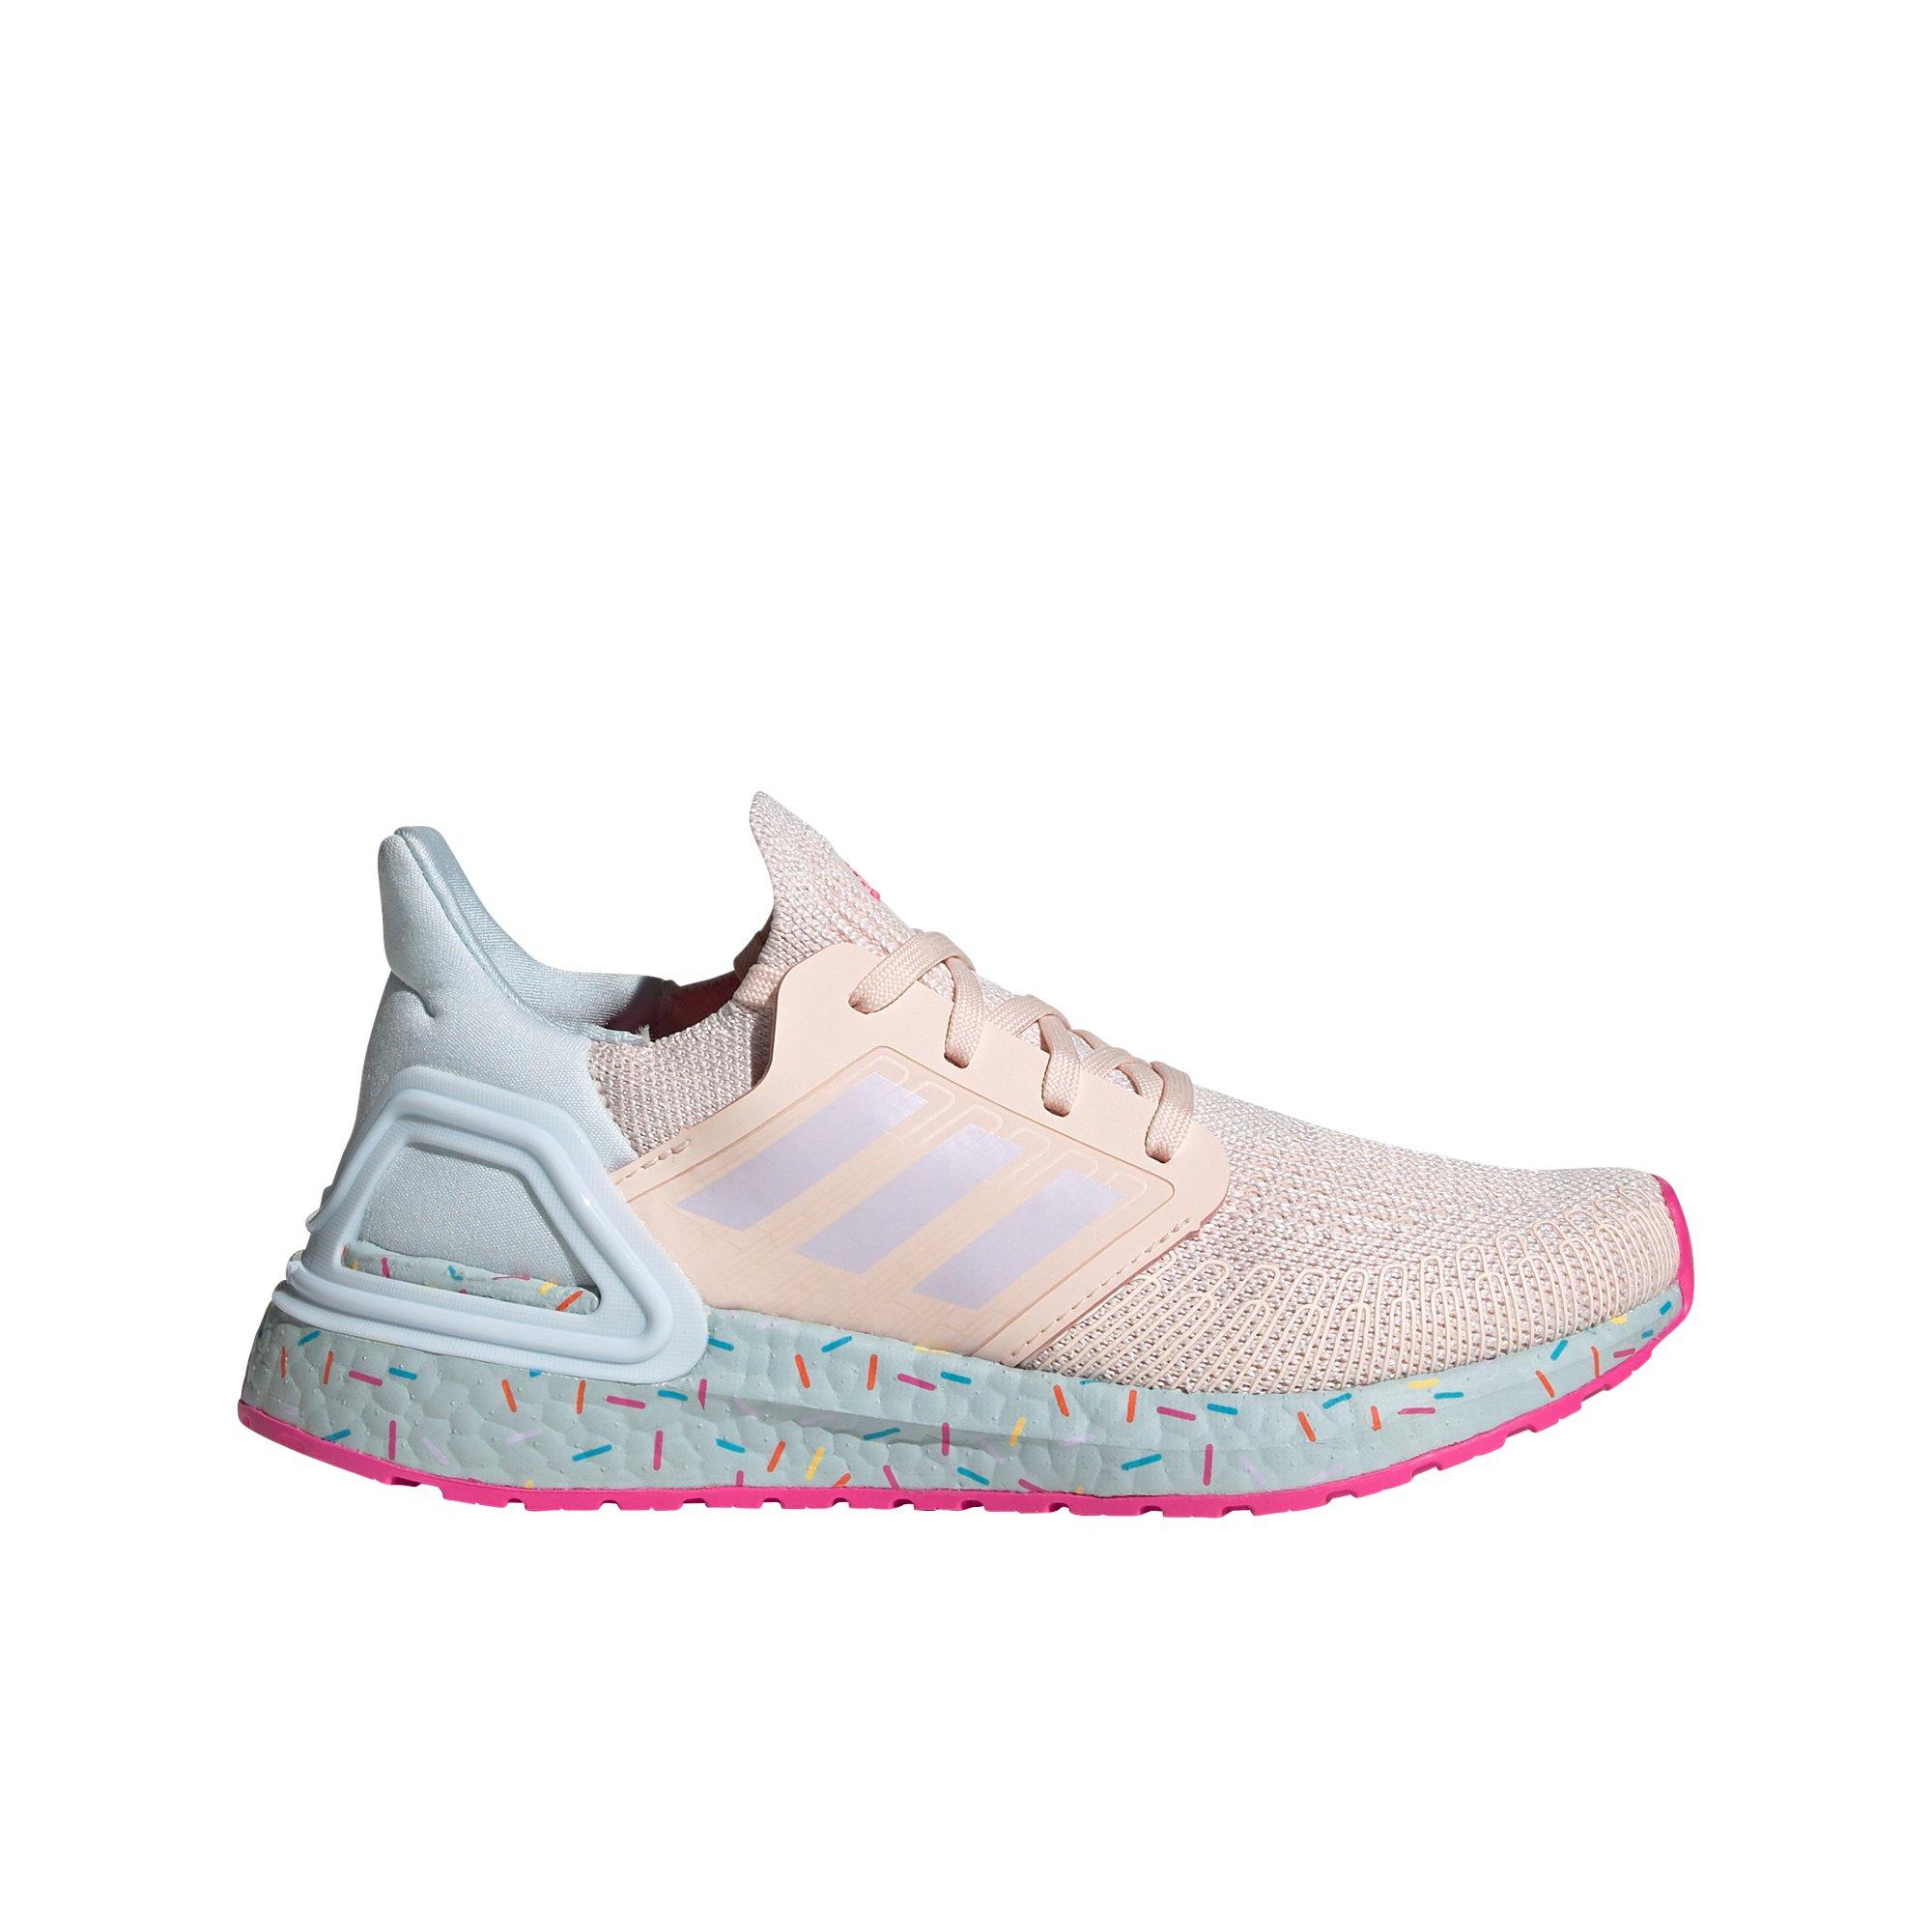 ultraboost 20 shoes pink